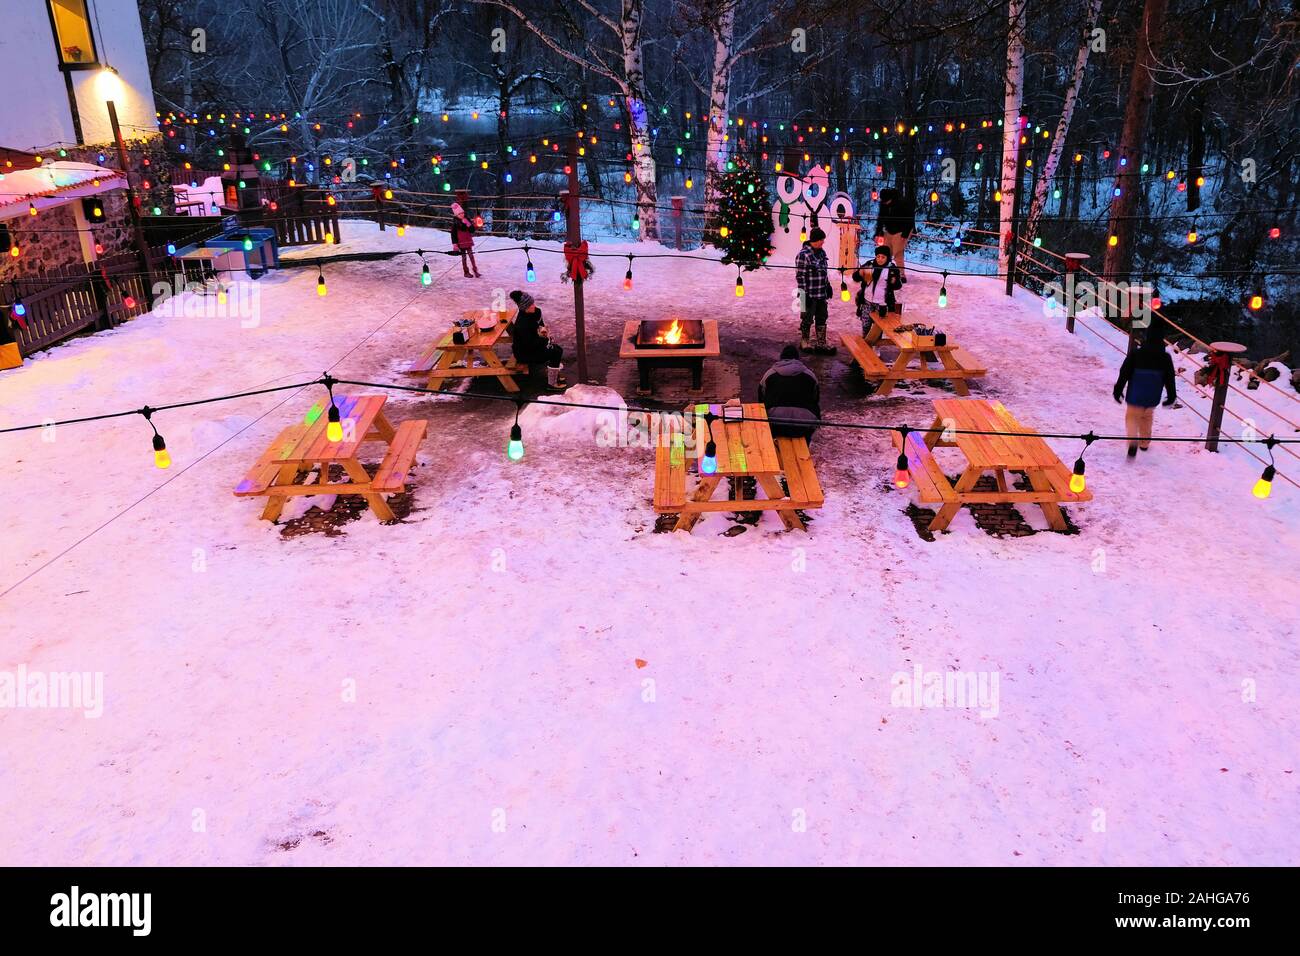 Outdoor dining in the snow with a bonfire and wooden park benches in Leavenworth, Washington, USA on a cold winter night. Stock Photo